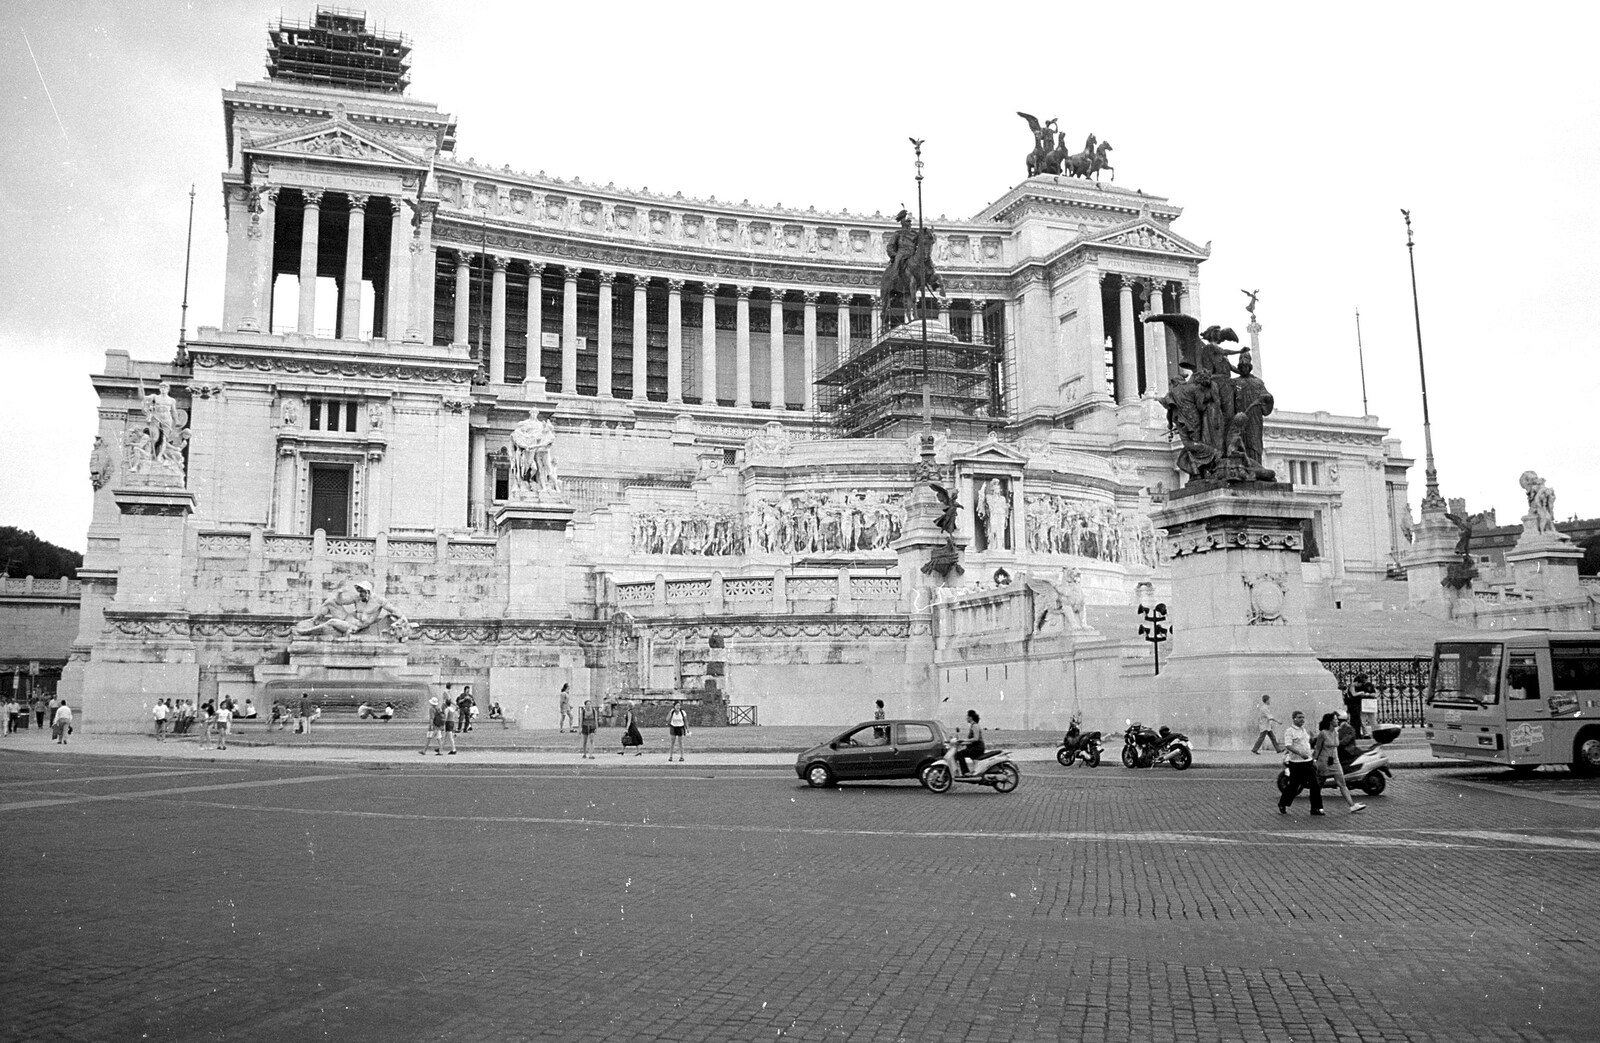 The Forum from A Working Trip to Rome, Italy - 10th September 1999